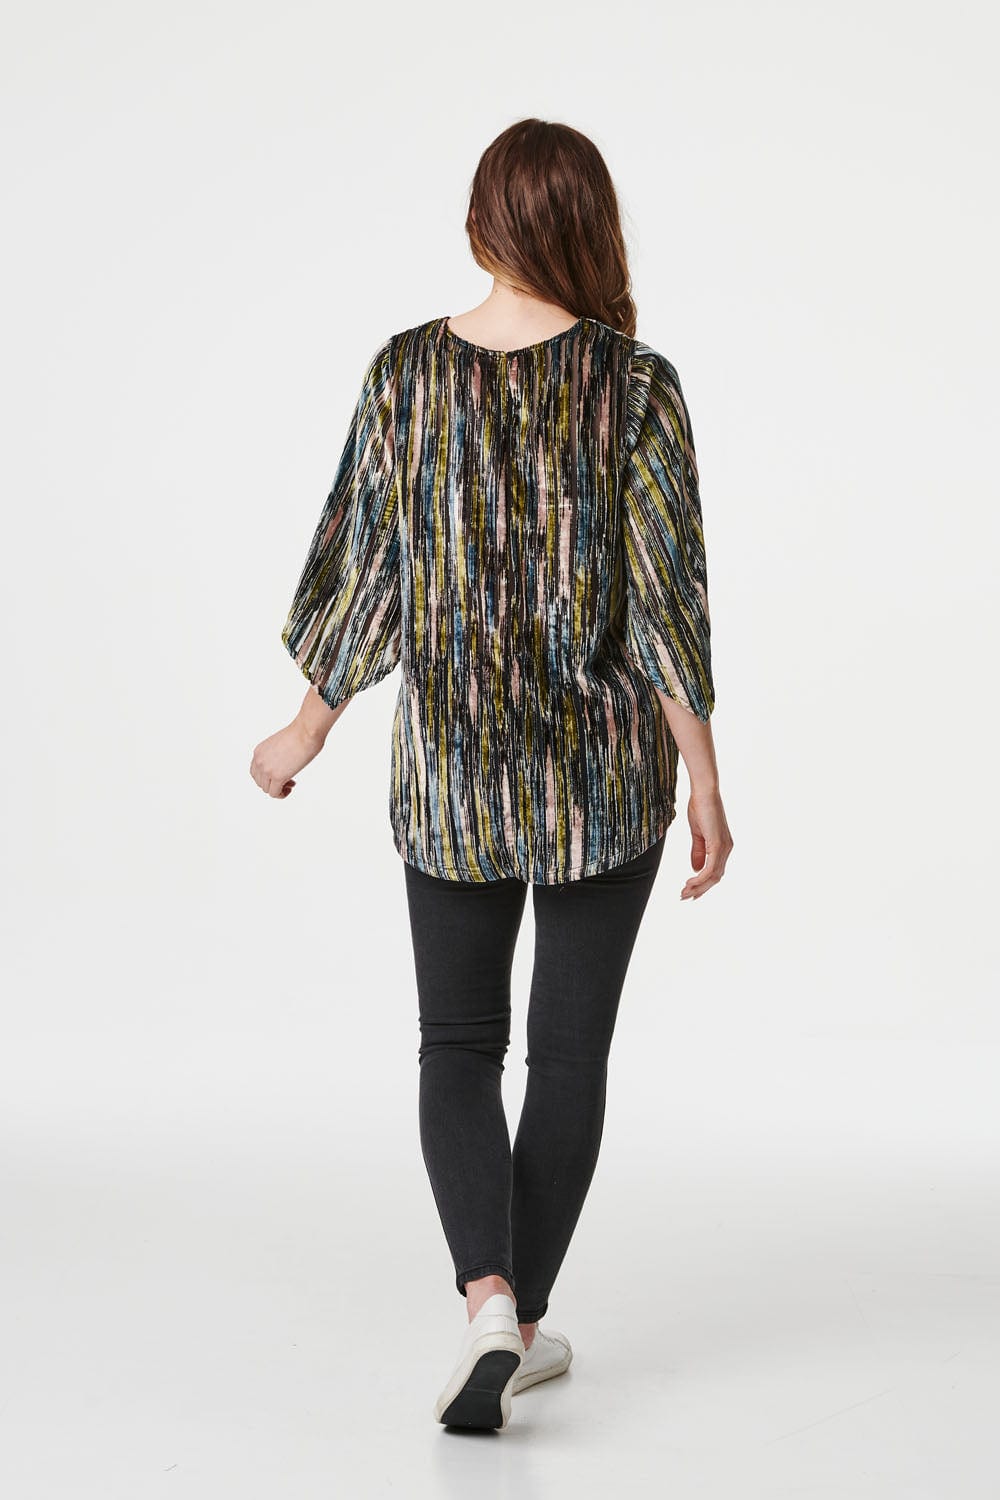 Black | Striped Batwing Sleeve Blouse